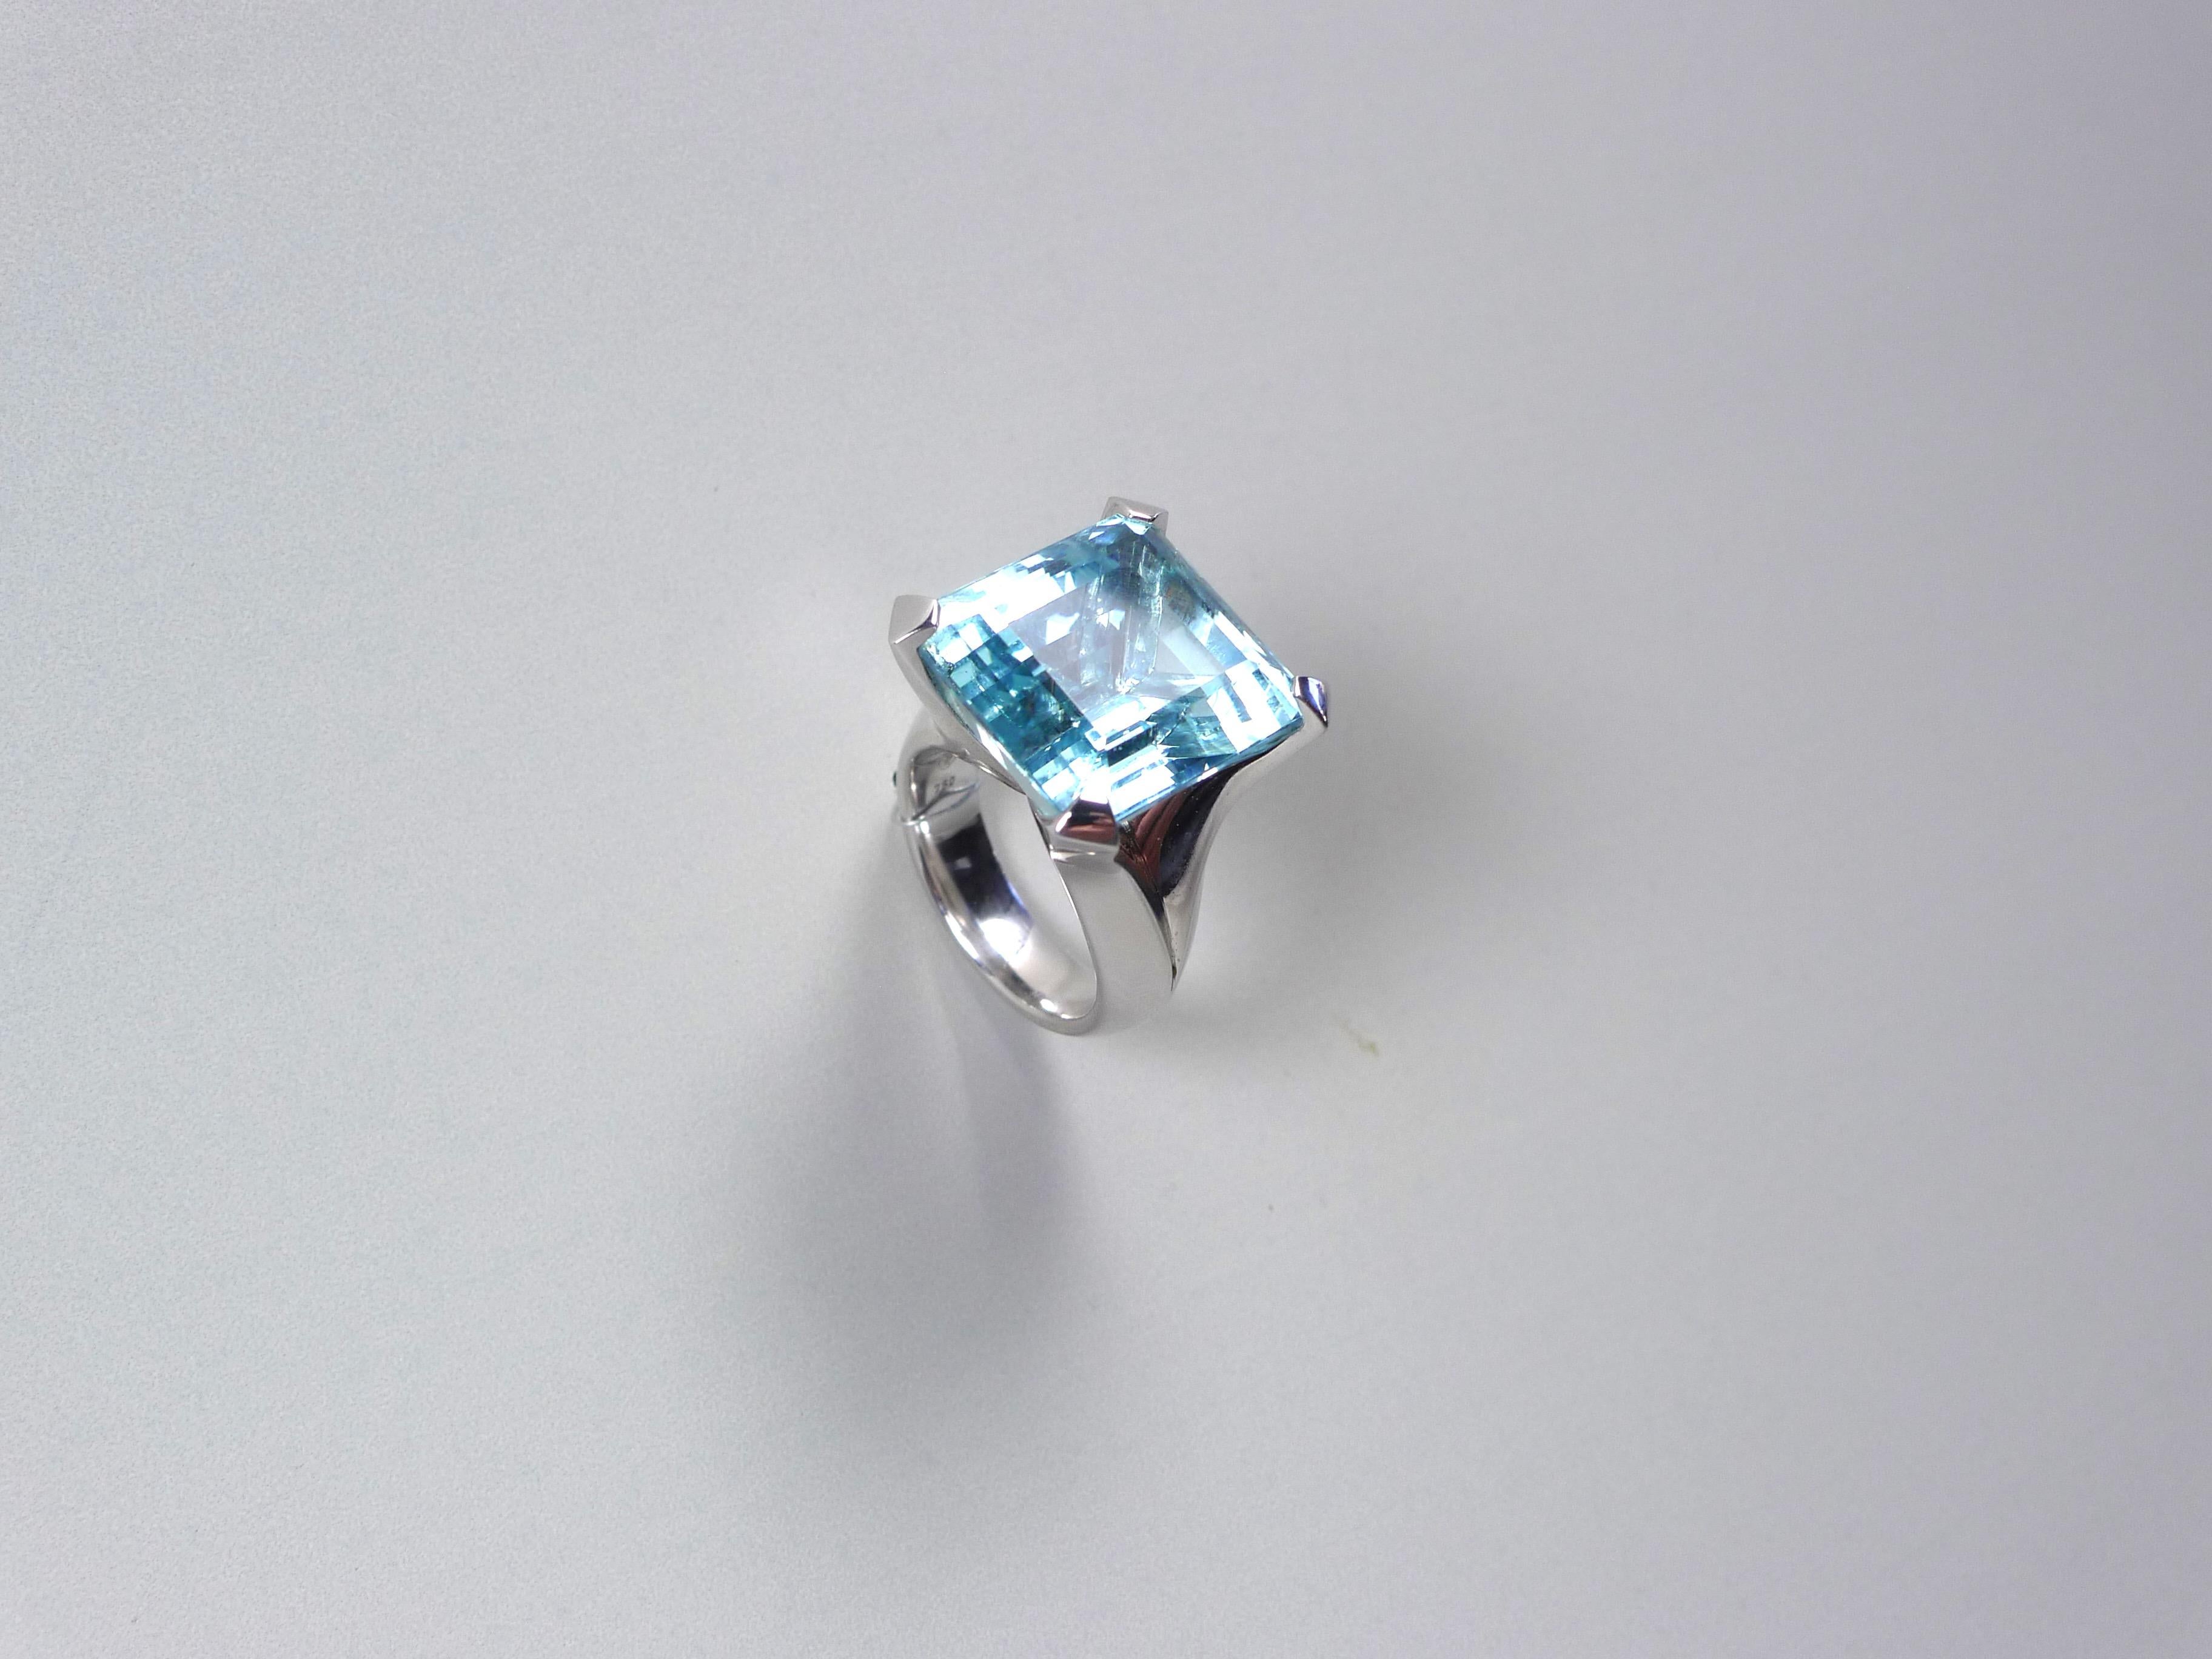 CRYSTAL SKY is my name. This impressive ring from TRUSTED GREEN shows off a nearly perfect squarish 25.02 carat step-cut aquamarine of a transparent lively intense blue. If a beryllium cristal is dotted by iron instead of vanadium, it gets a blue